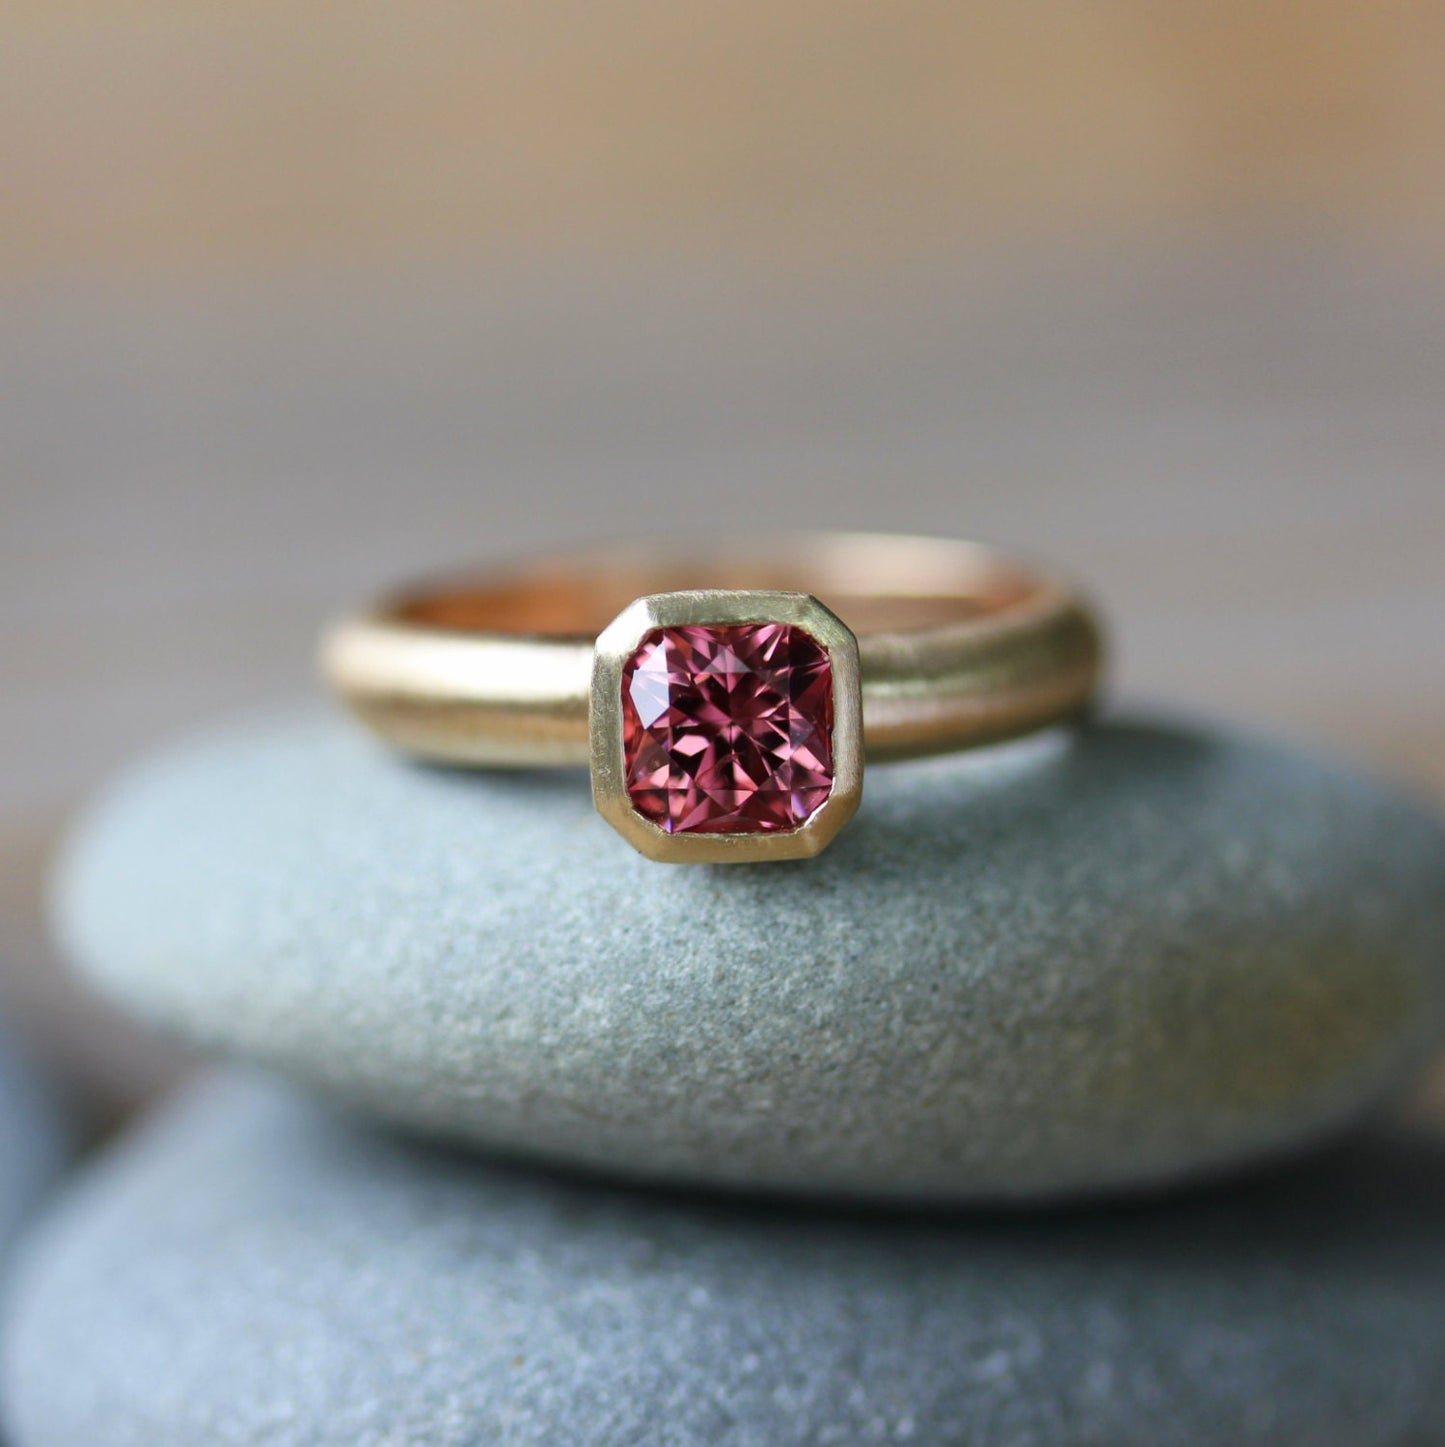 A Handmade Asscher Cut Pink Spinel Ring in 14k Yellow Gold with a pink sapphire on top of rocks.